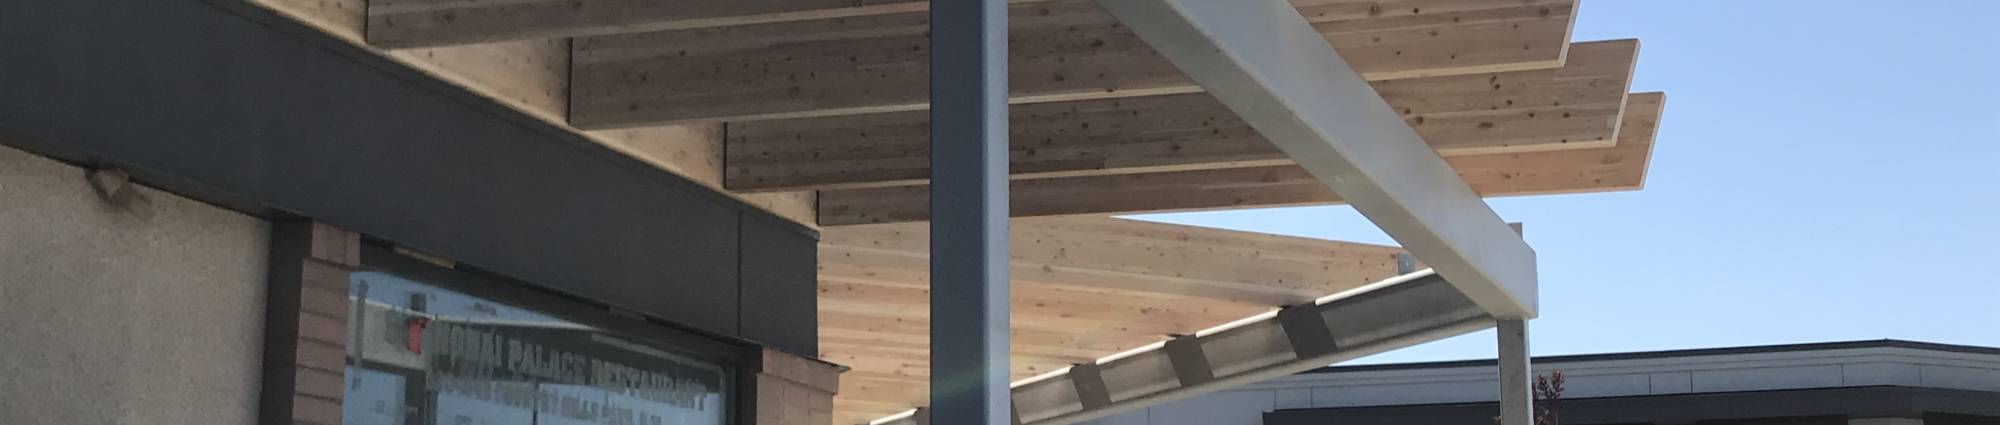 Glulam structure on commercial building